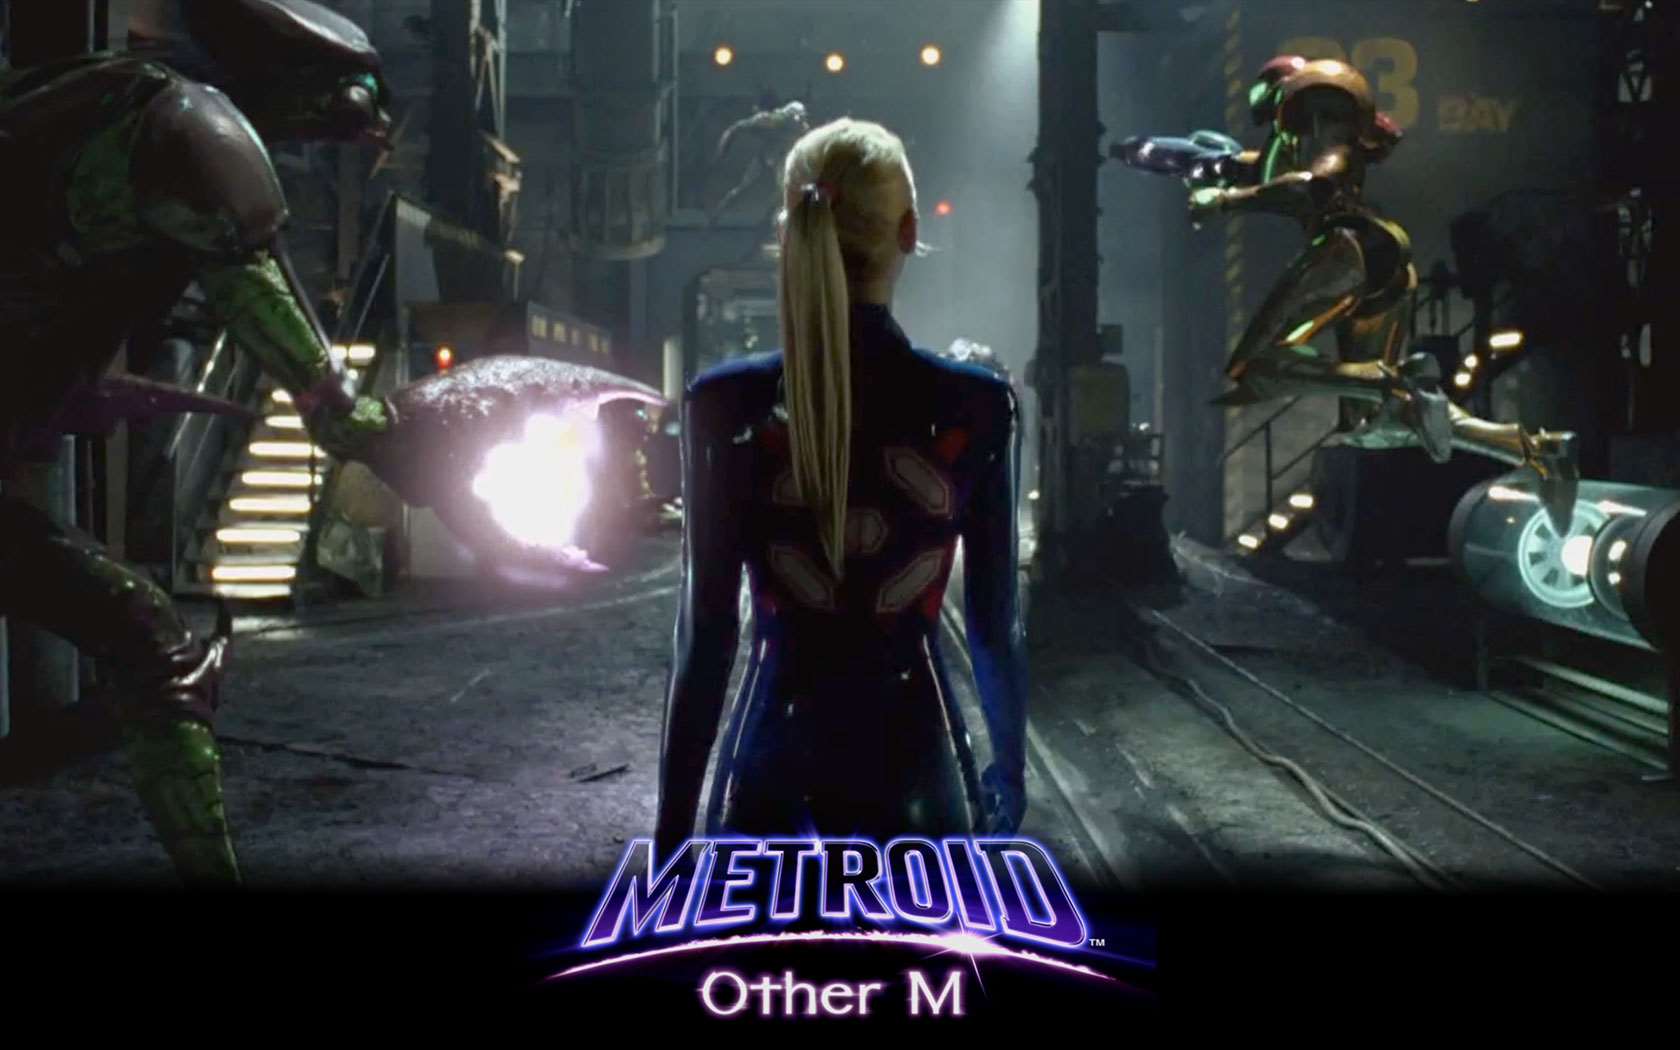 Metroid: Other M Wallpaper 3 (1680 x 1050)